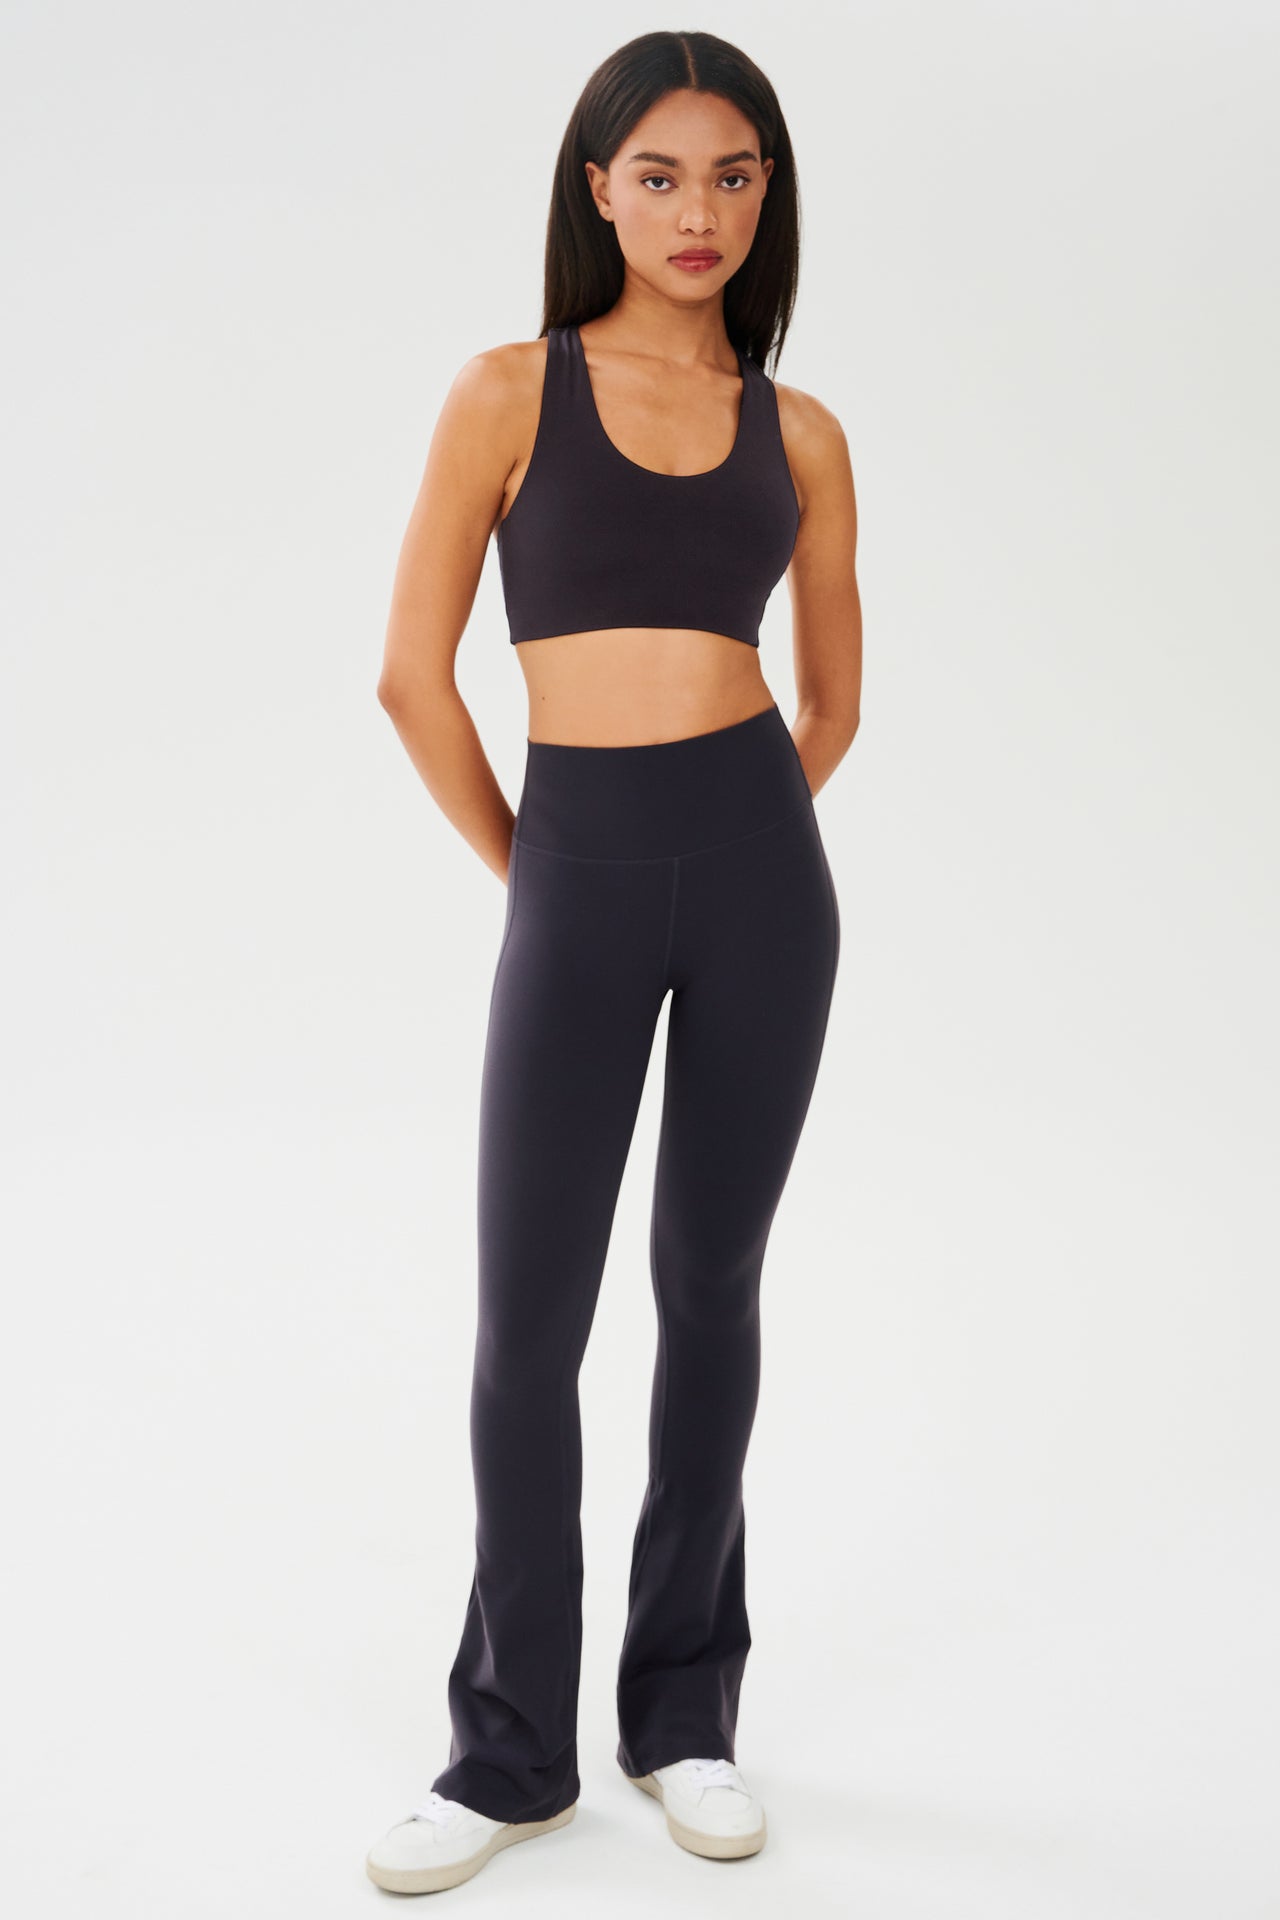 Full front view of woman with straight dark hair wearing dark gray with dark blue tone bra and dark gray with dark blue tone high waist below ankle length legging with wide flared bottoms paired with white shoes